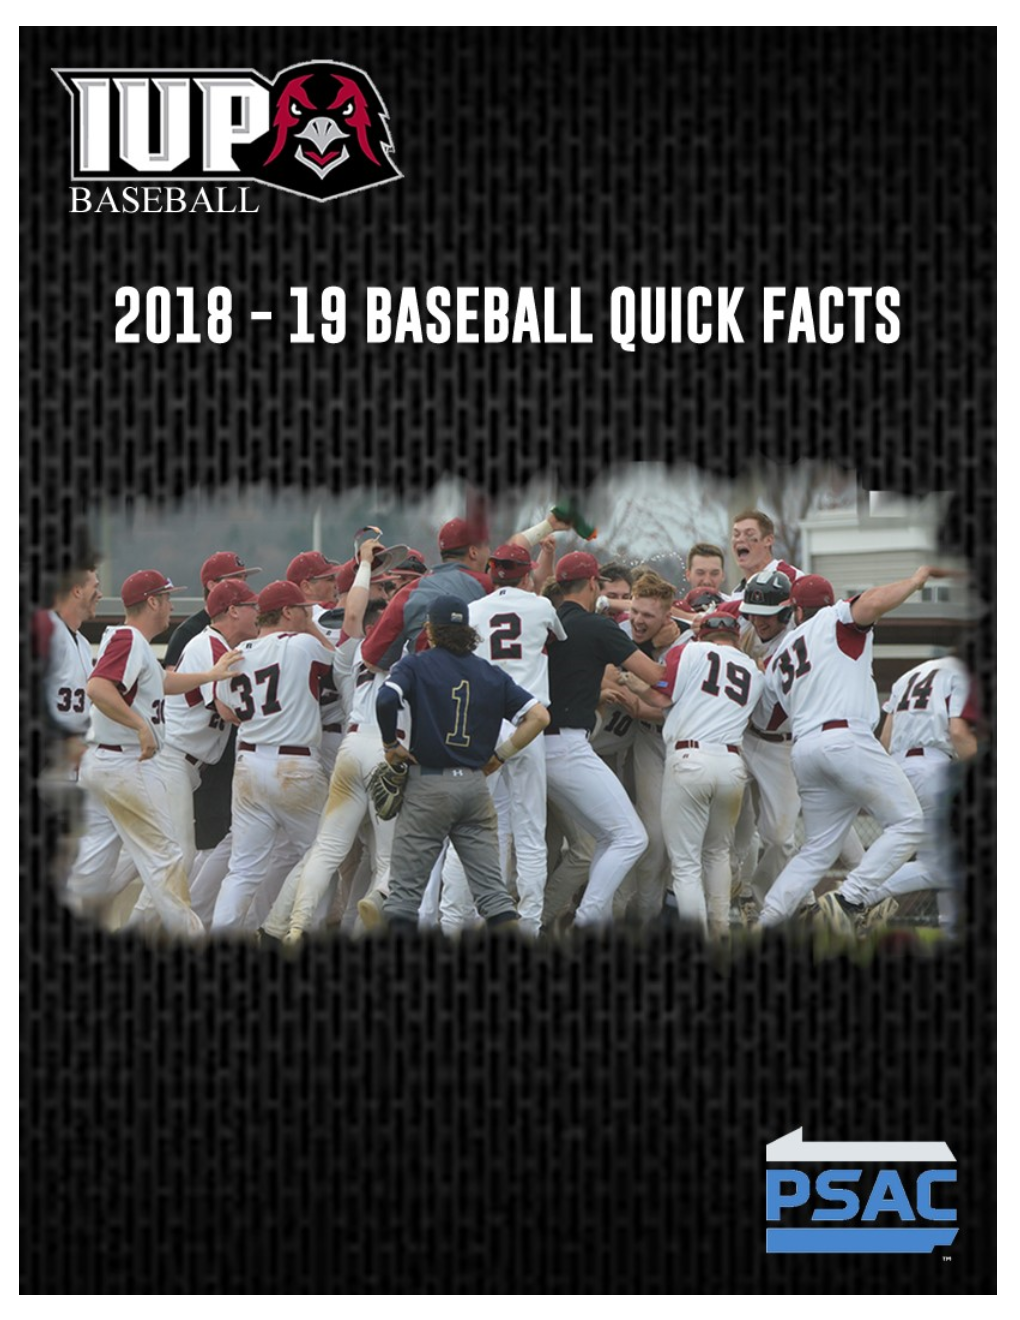 NEW 2018 2019 Quick Facts.Pdf